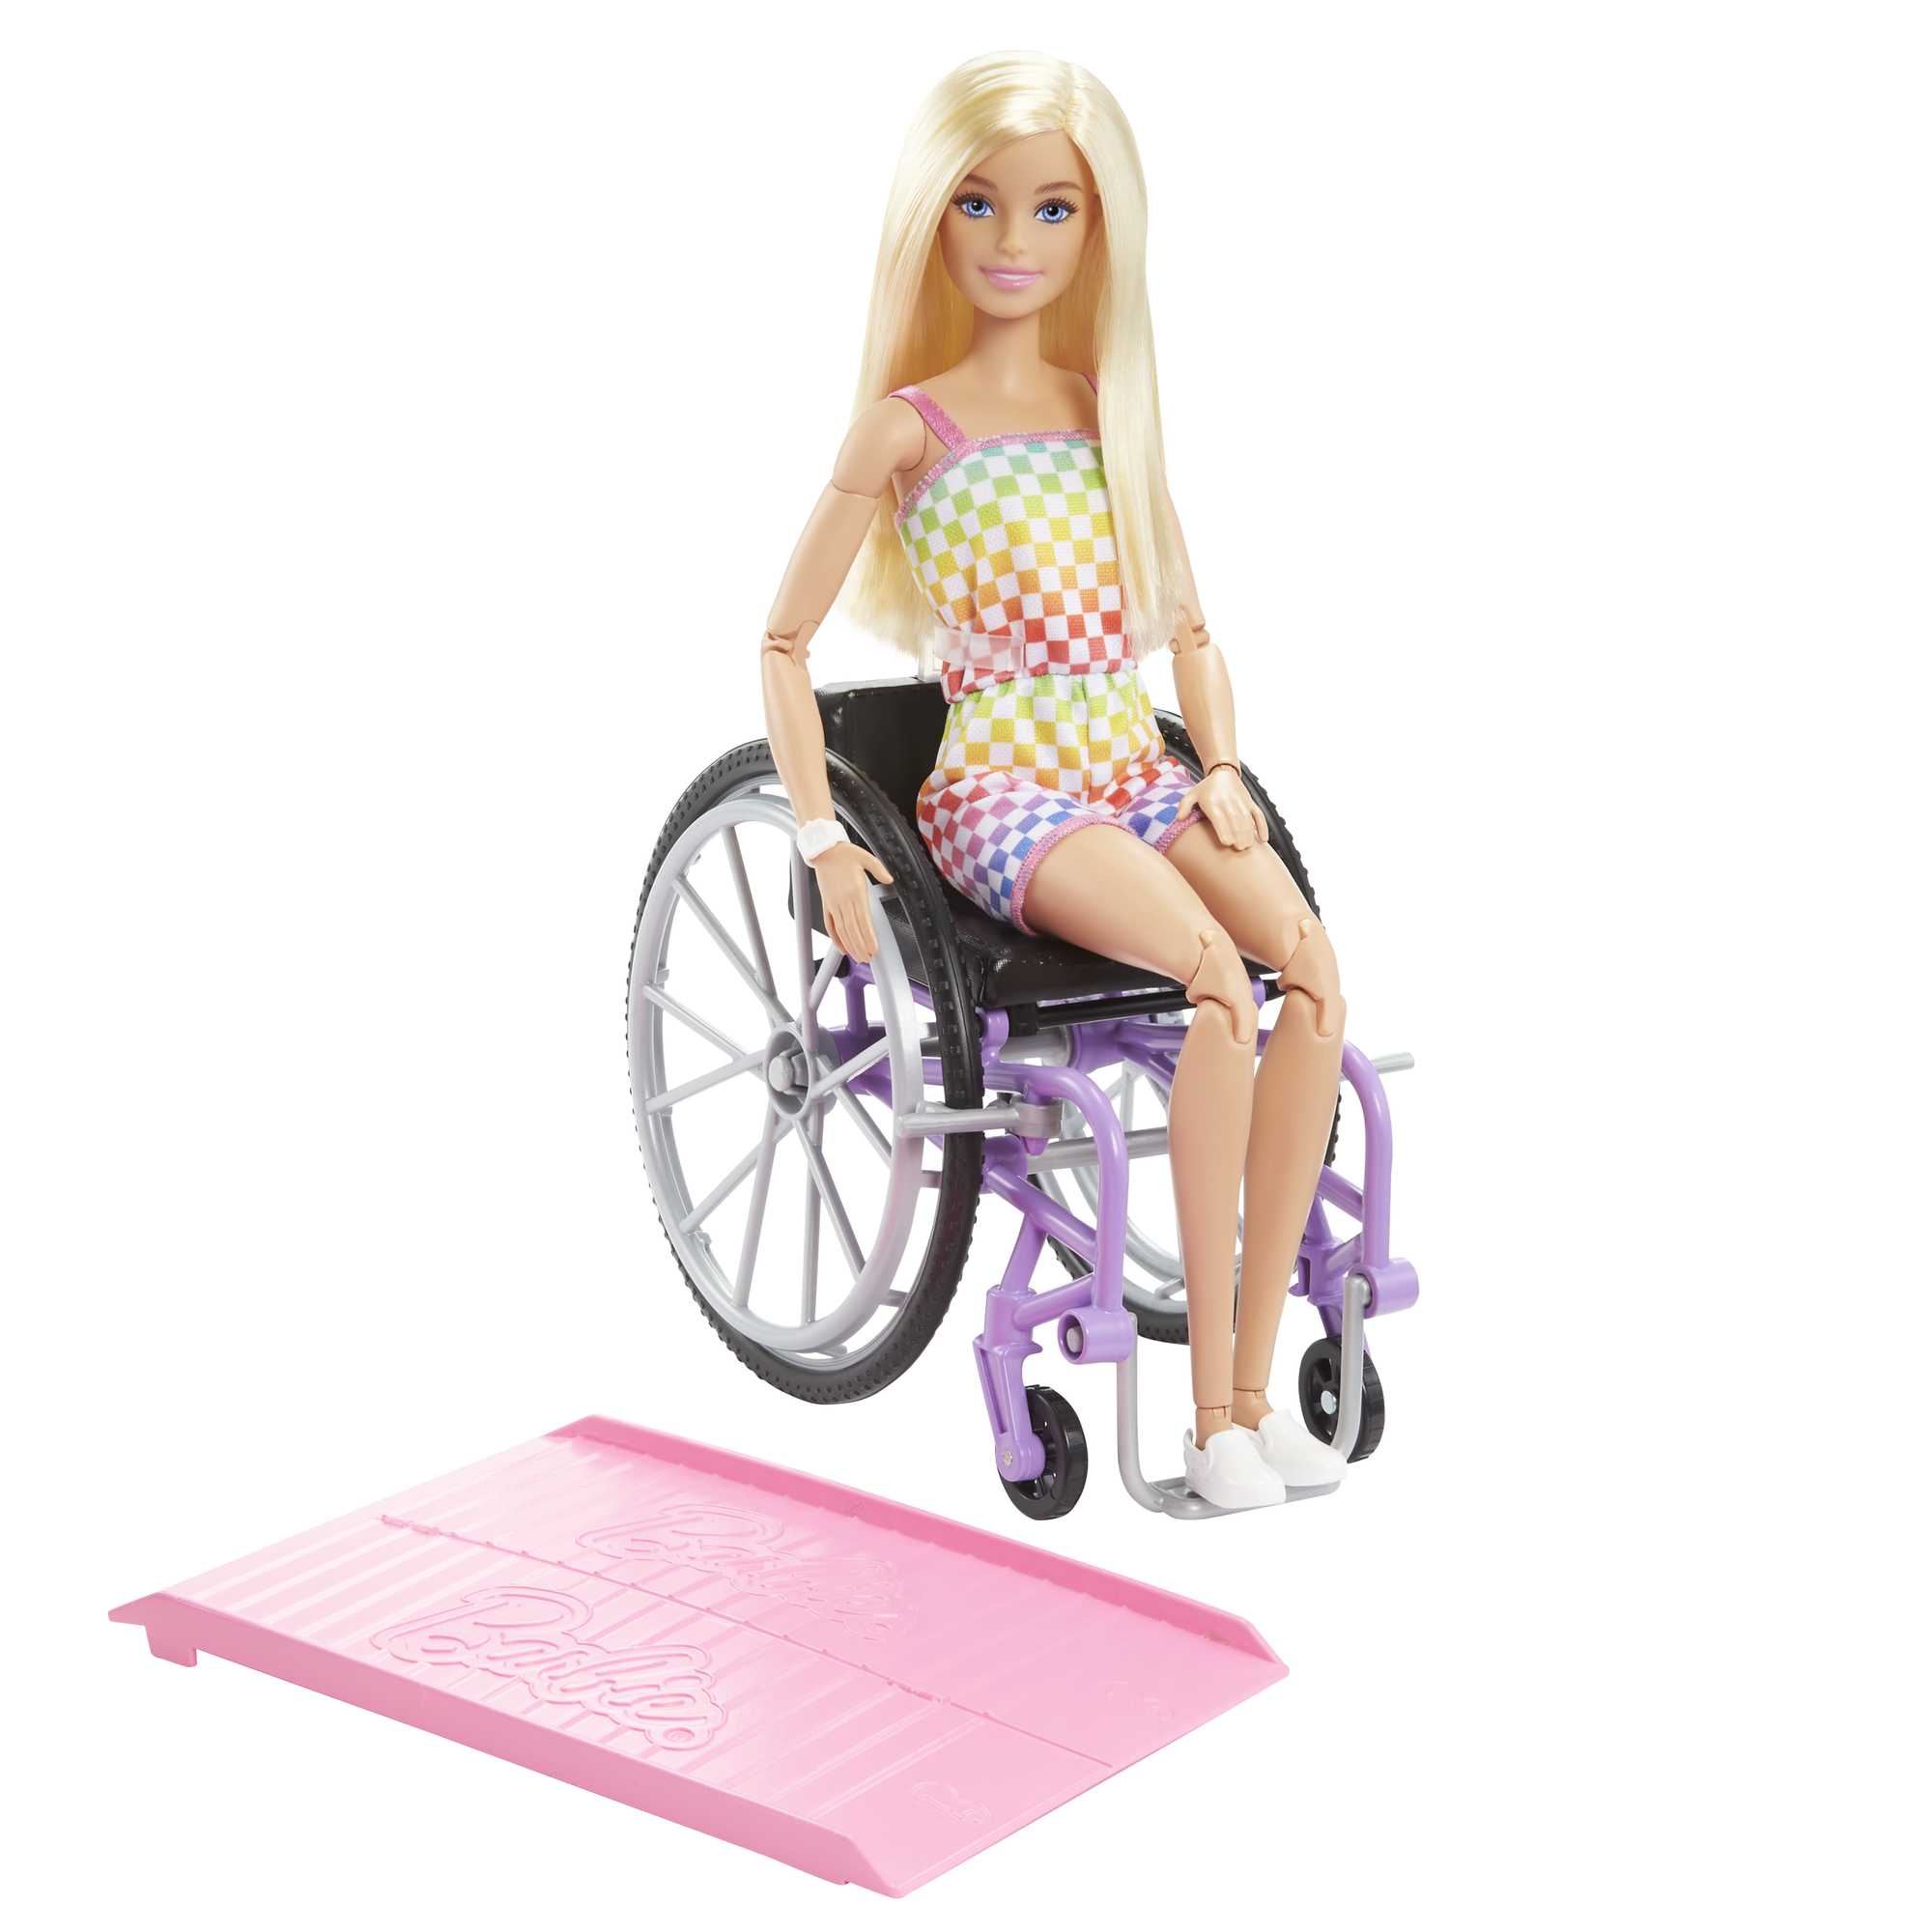 Barbie Doll With Wheelchair And Ramp - Blonde